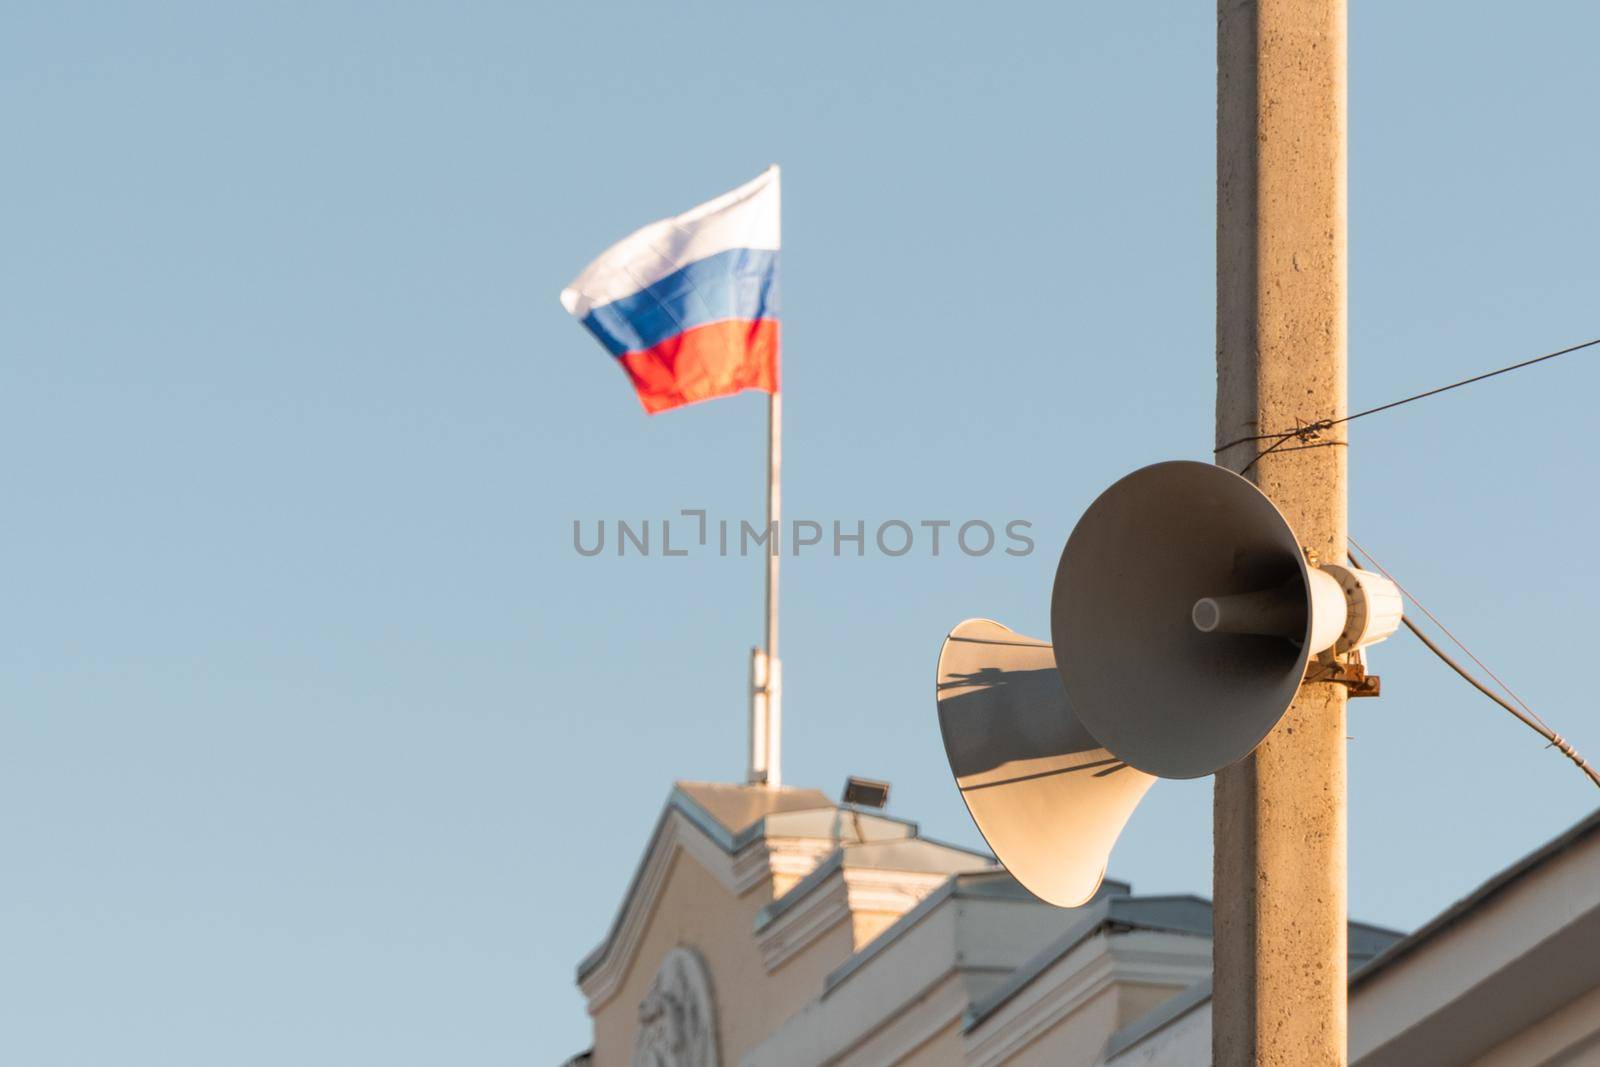 loudspeakers for emergency messages on the electrification pole. in the background of the administrative building the Russian flag is flying against the blue clear sky